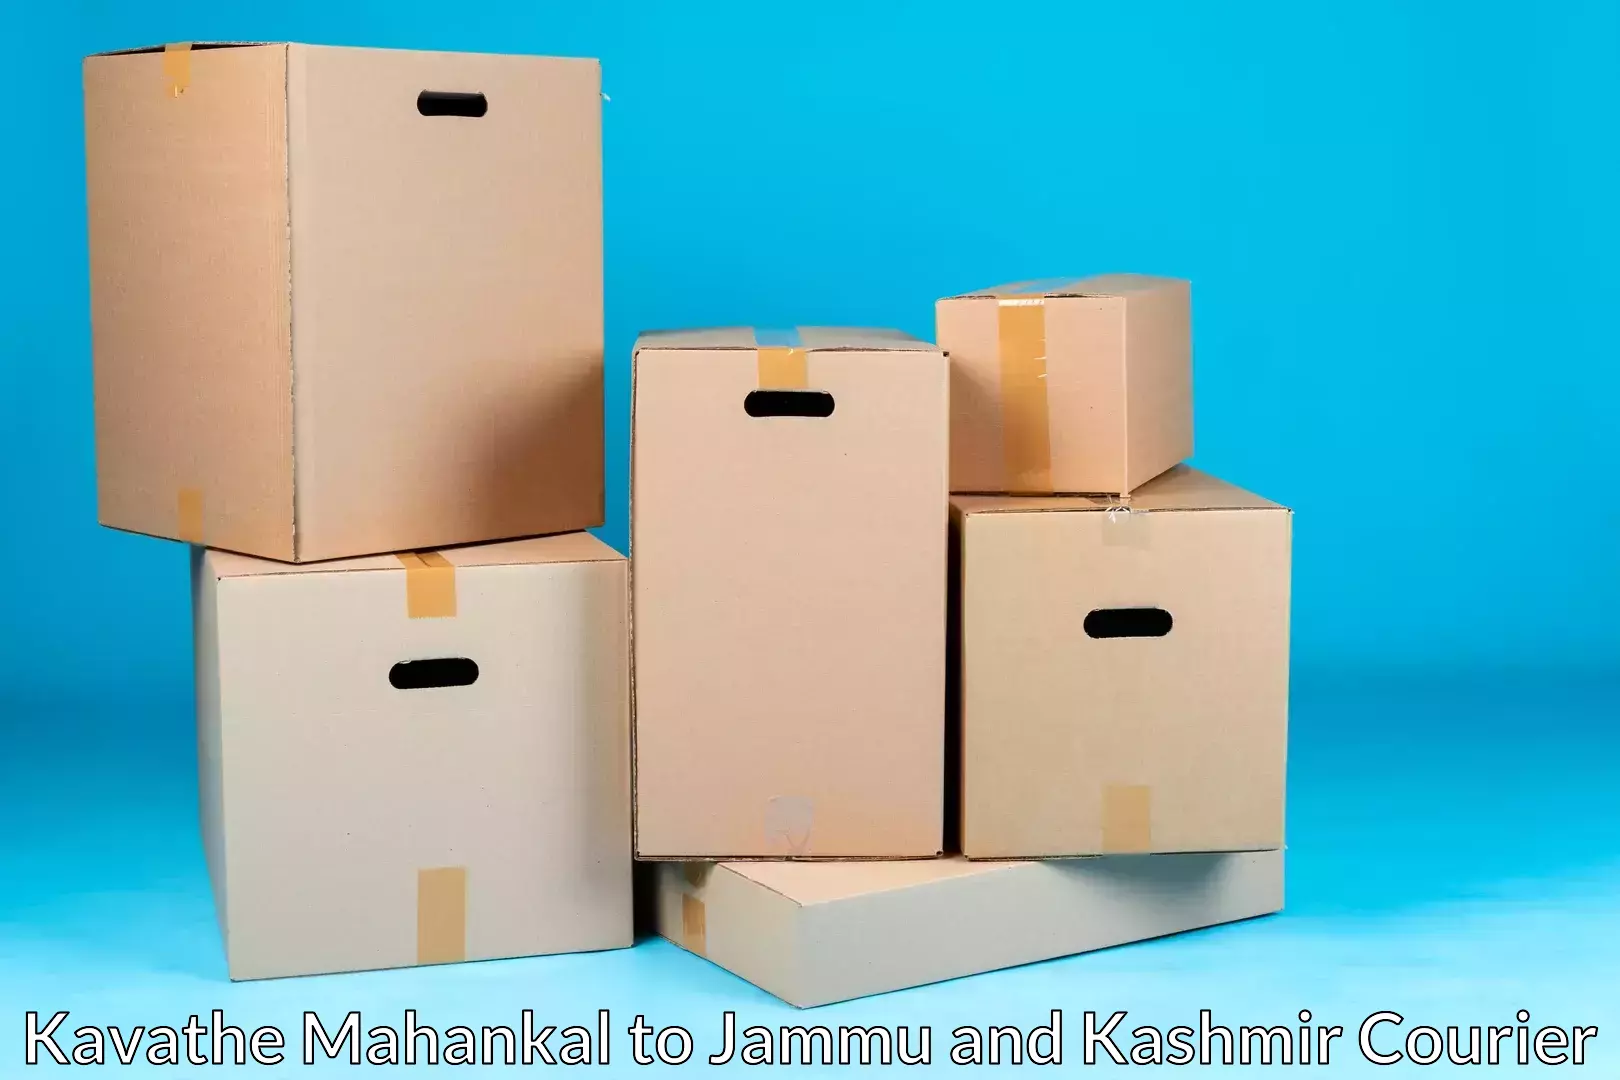 Quality relocation services Kavathe Mahankal to Shopian